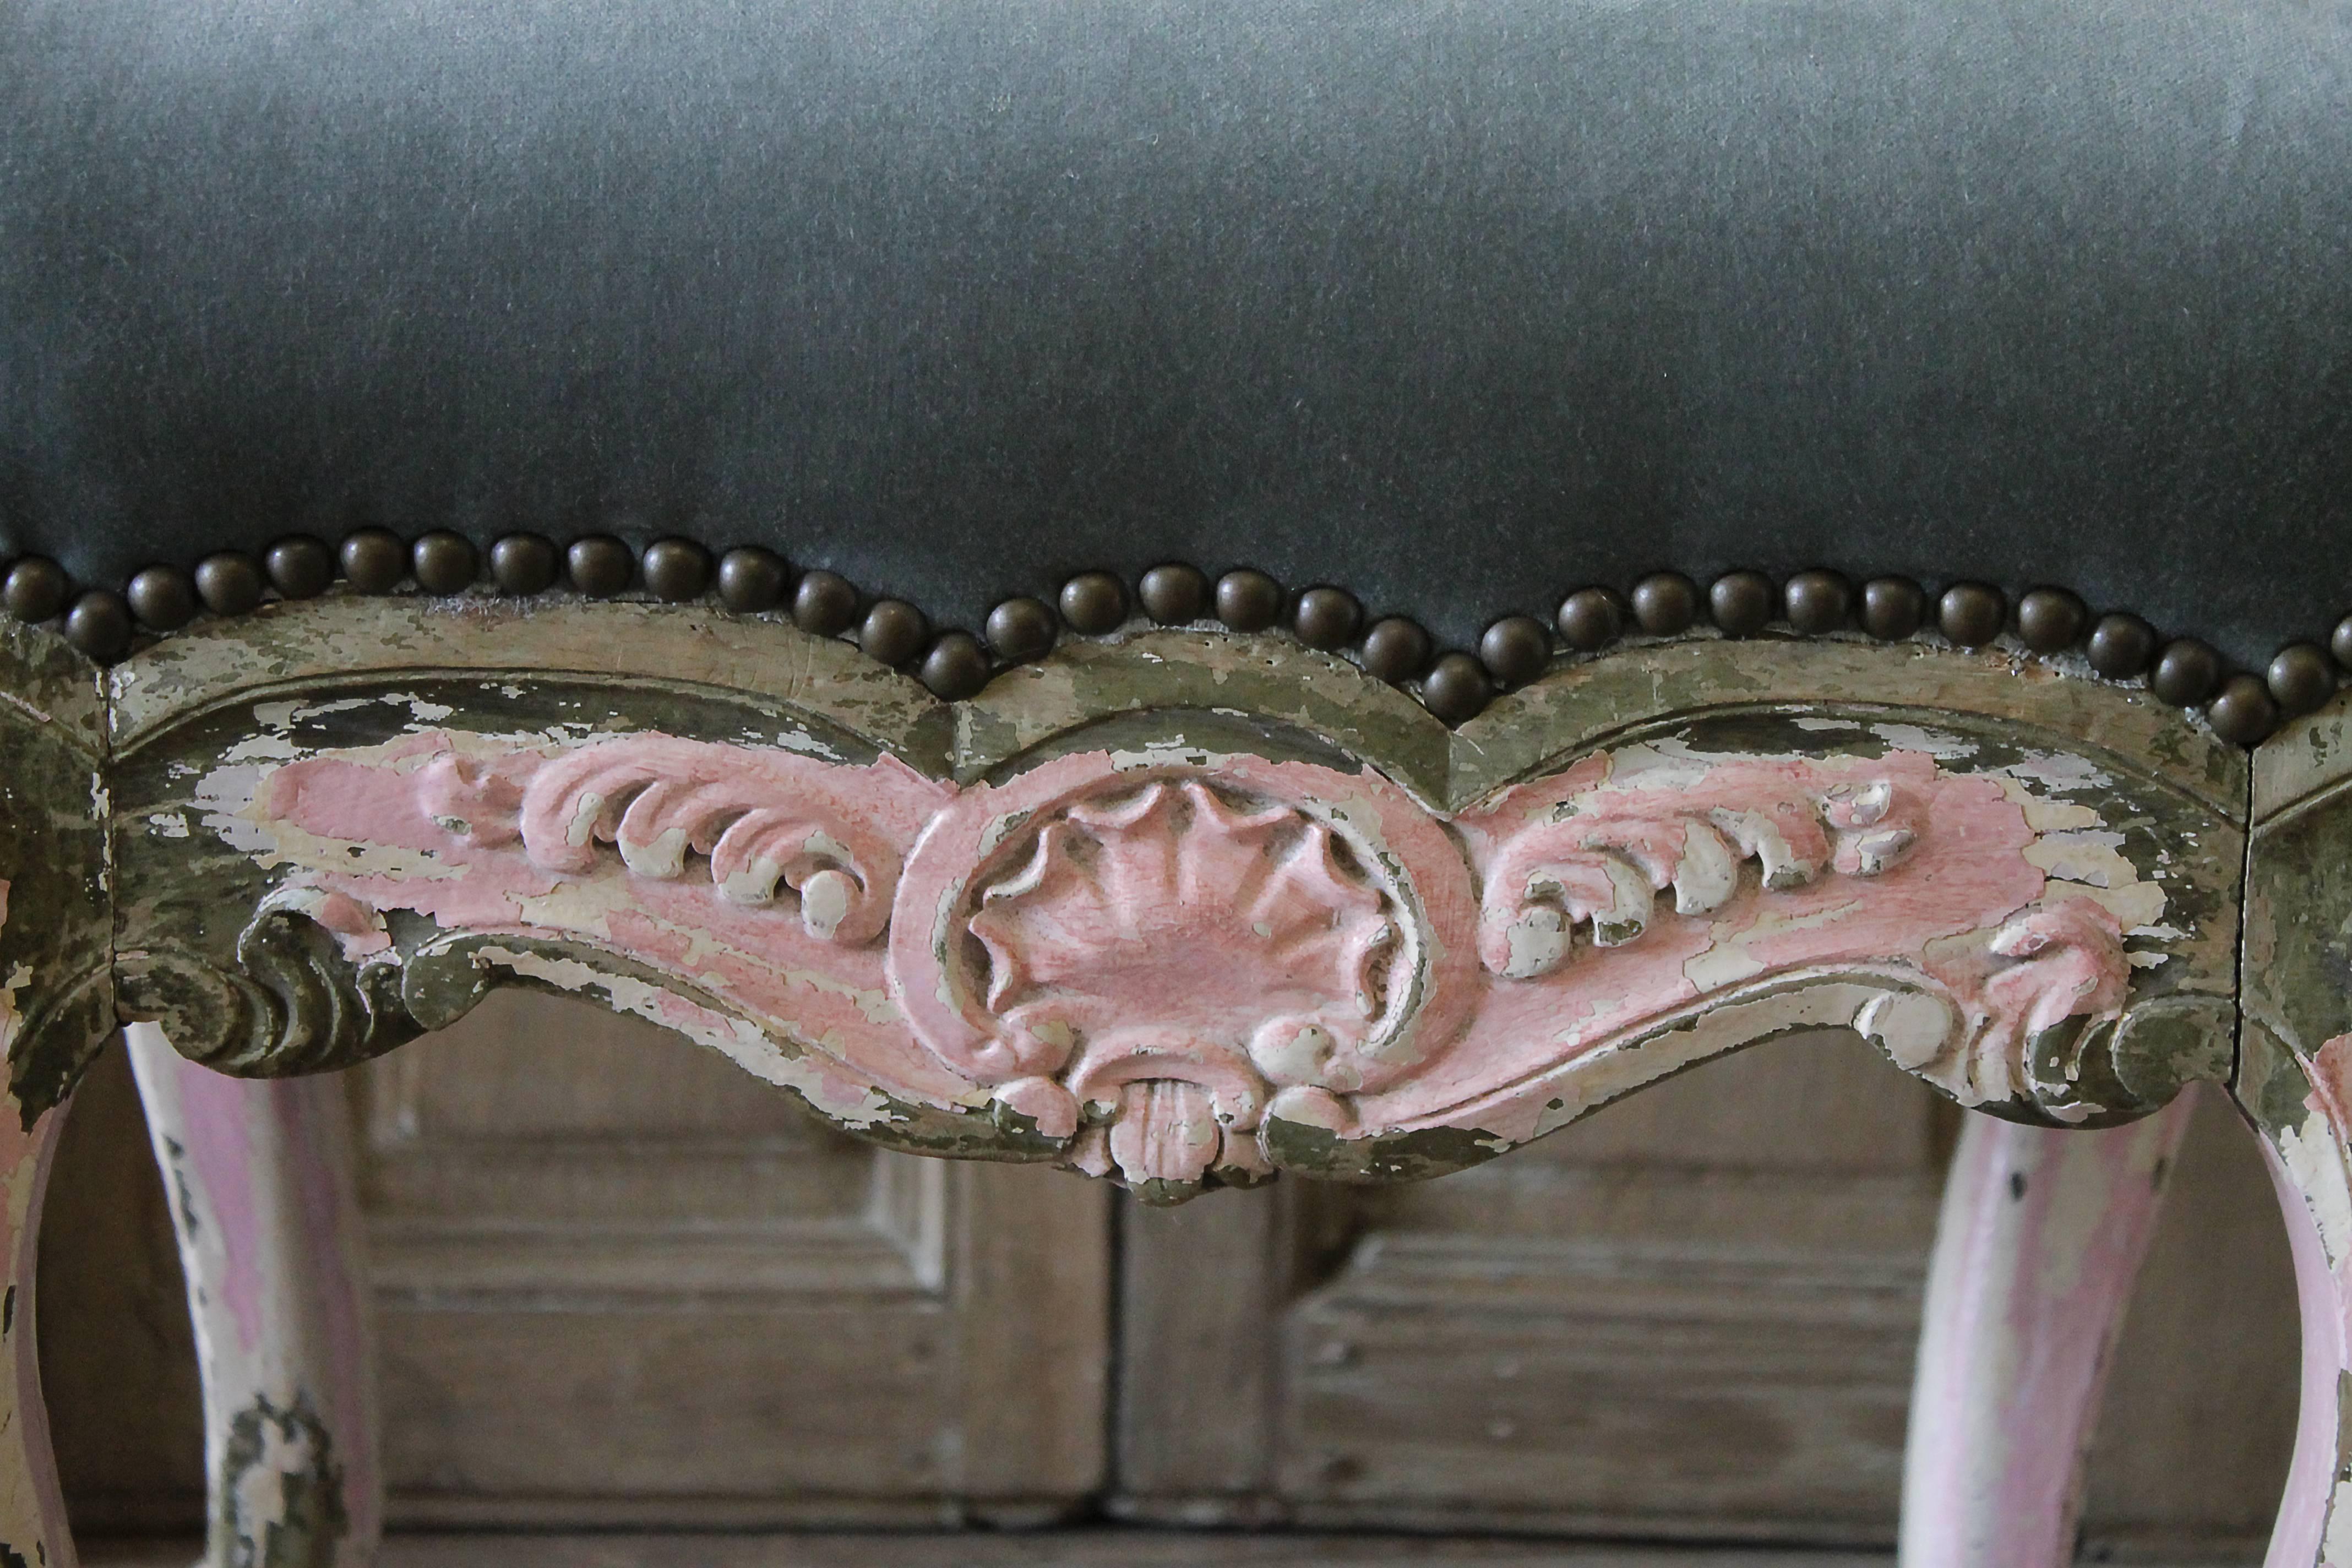 19th century Petite French painted Louis XV style vanity stool
with original chippy paint in a soft pink, cream exposing original natural wood tones underneath.
Upholstered in a blue velvet with antique aged brass colored nail trim.
Legs are very